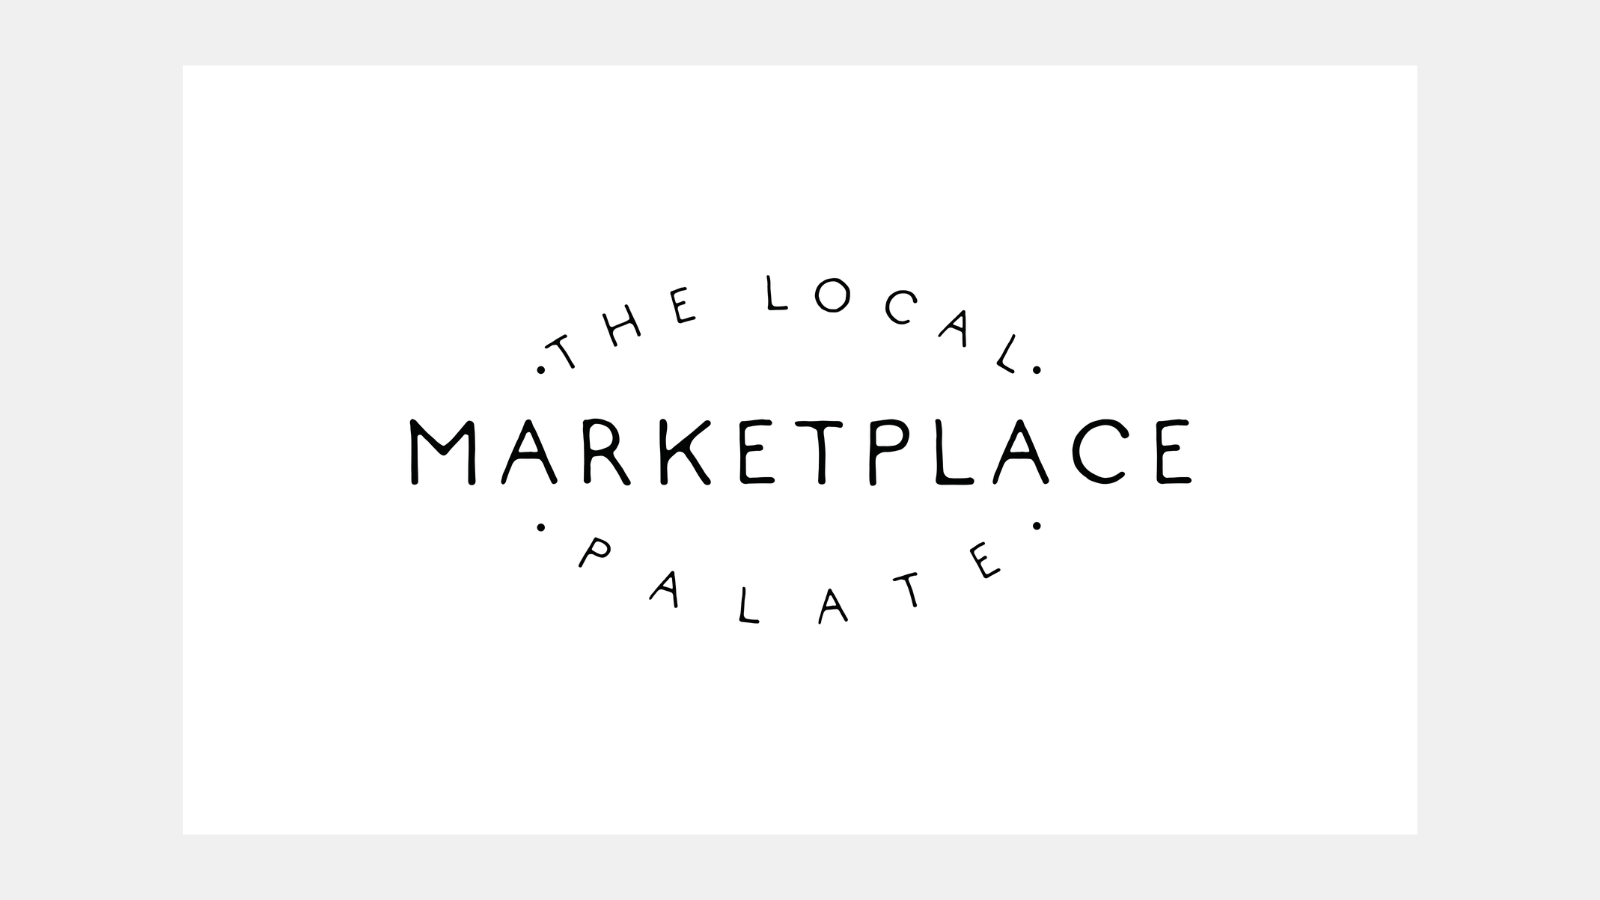 Find our butter on The Local Palate Marketplace